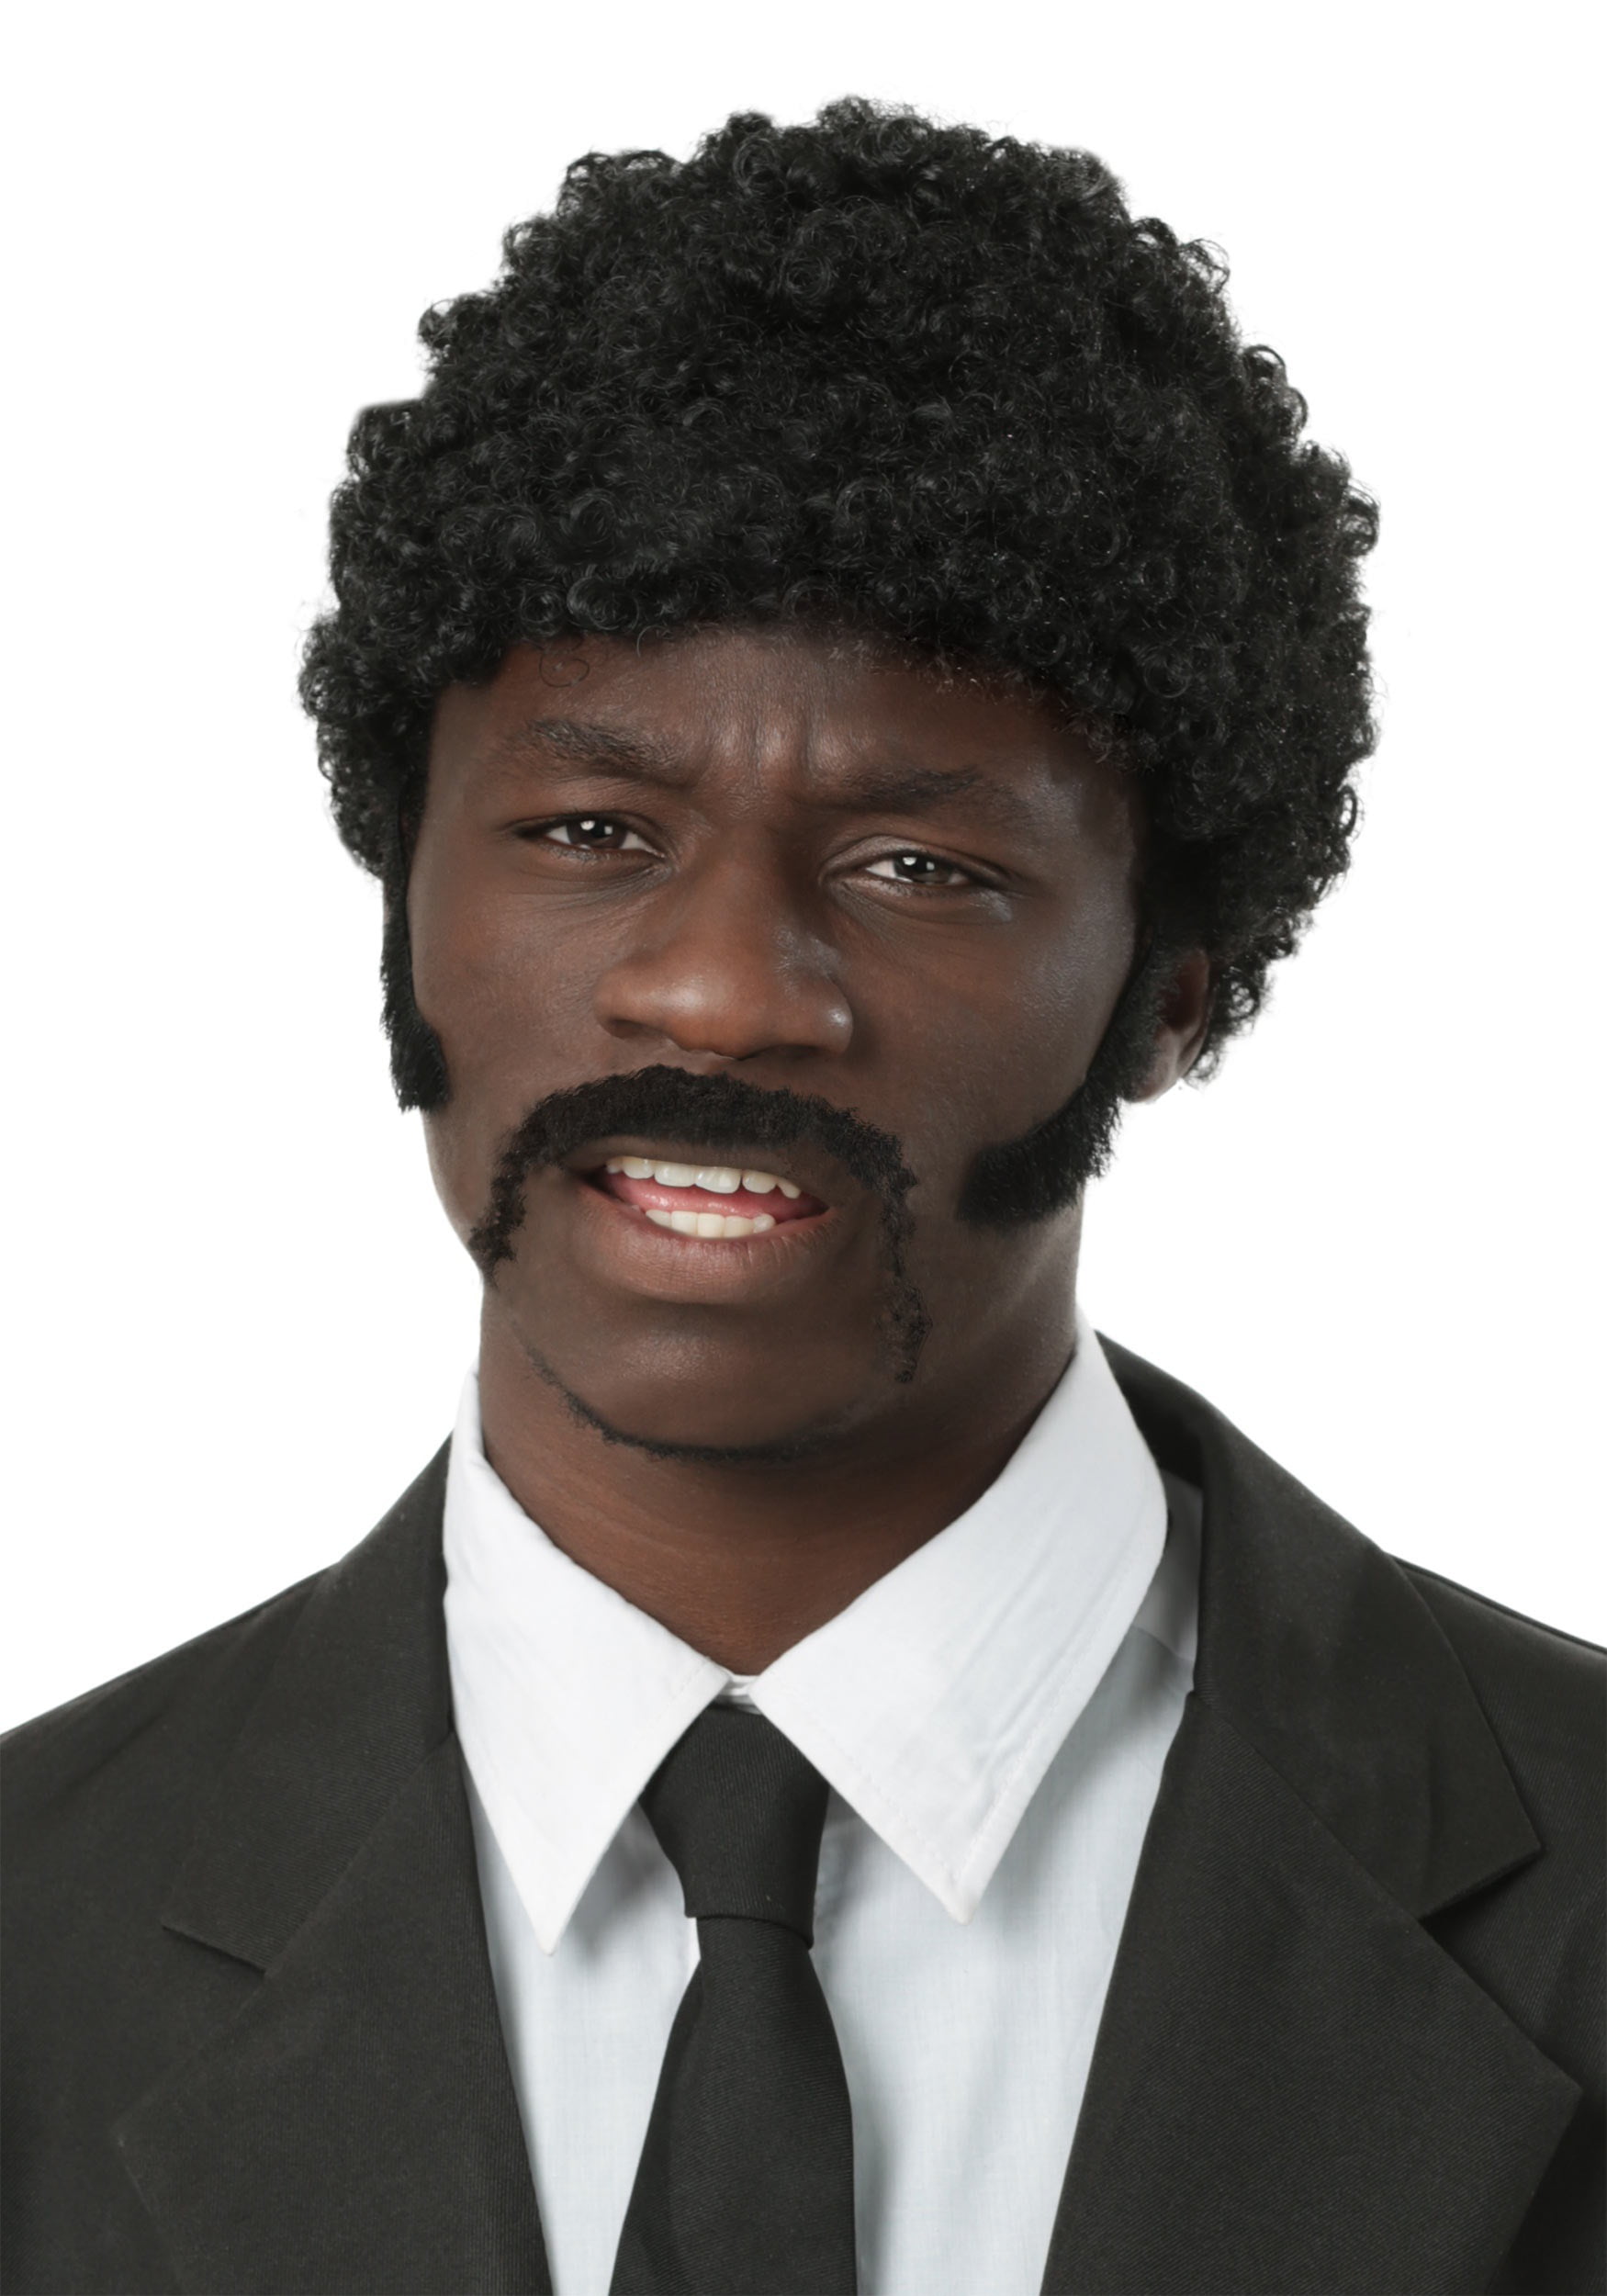 Pulp Fiction Adult Jules Winnfield Wig and Facial Hair Set 